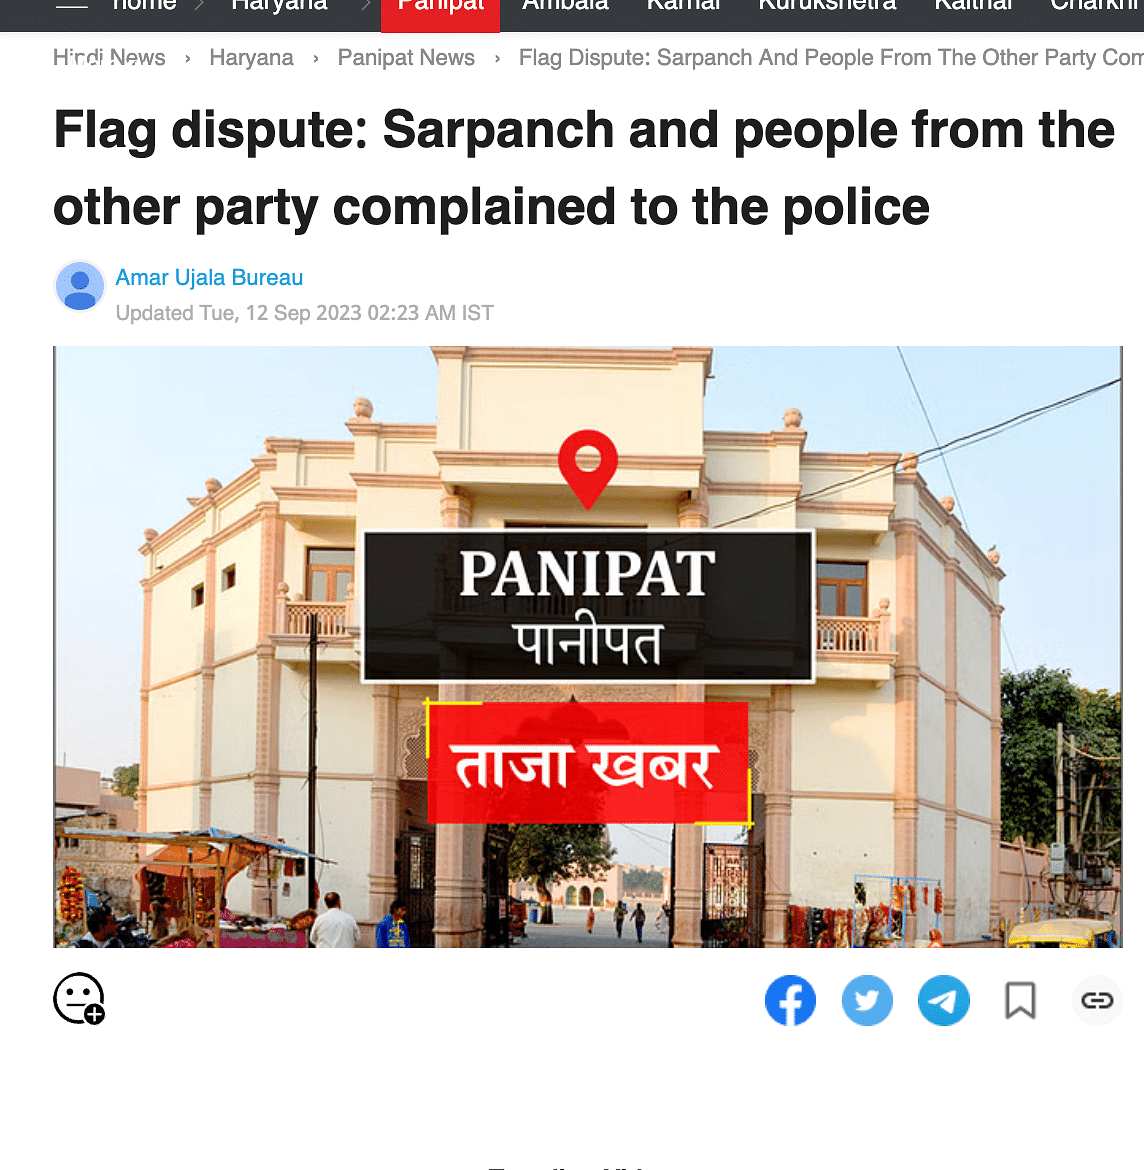 Sanoli Police's SHO Sunil Kumar confirmed to The Quint that there was no communal angle to this incident.